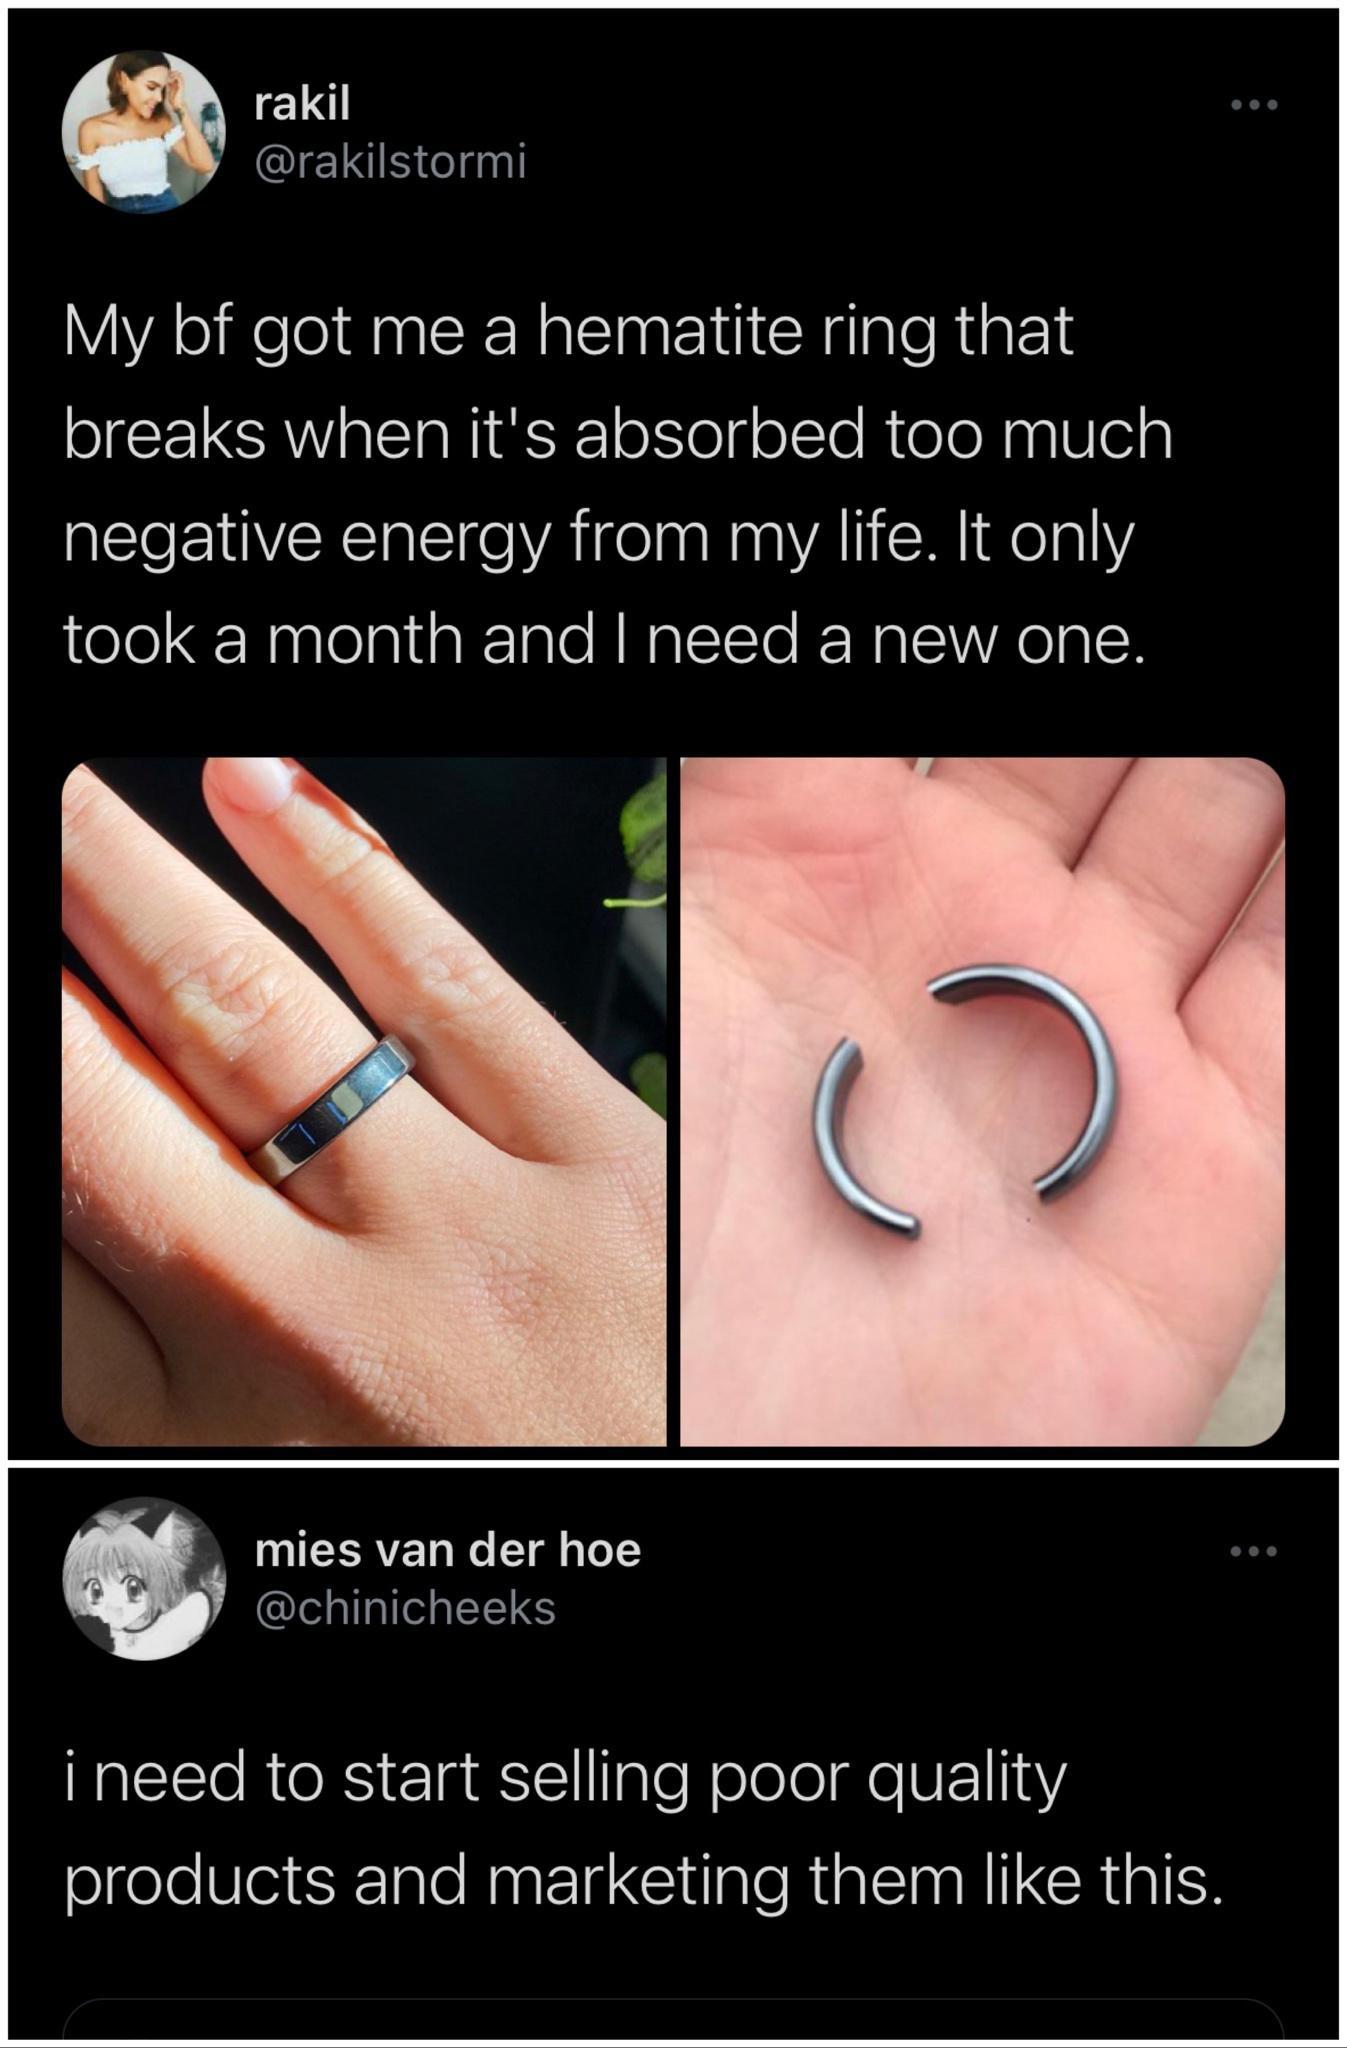 the funniest tweets - nail - rakil My bf got me a hematite ring that breaks when it's absorbed too much negative energy from my life. It only took a month and I need a new one. mies van der hoe i need to start selling poor quality products and marketing t